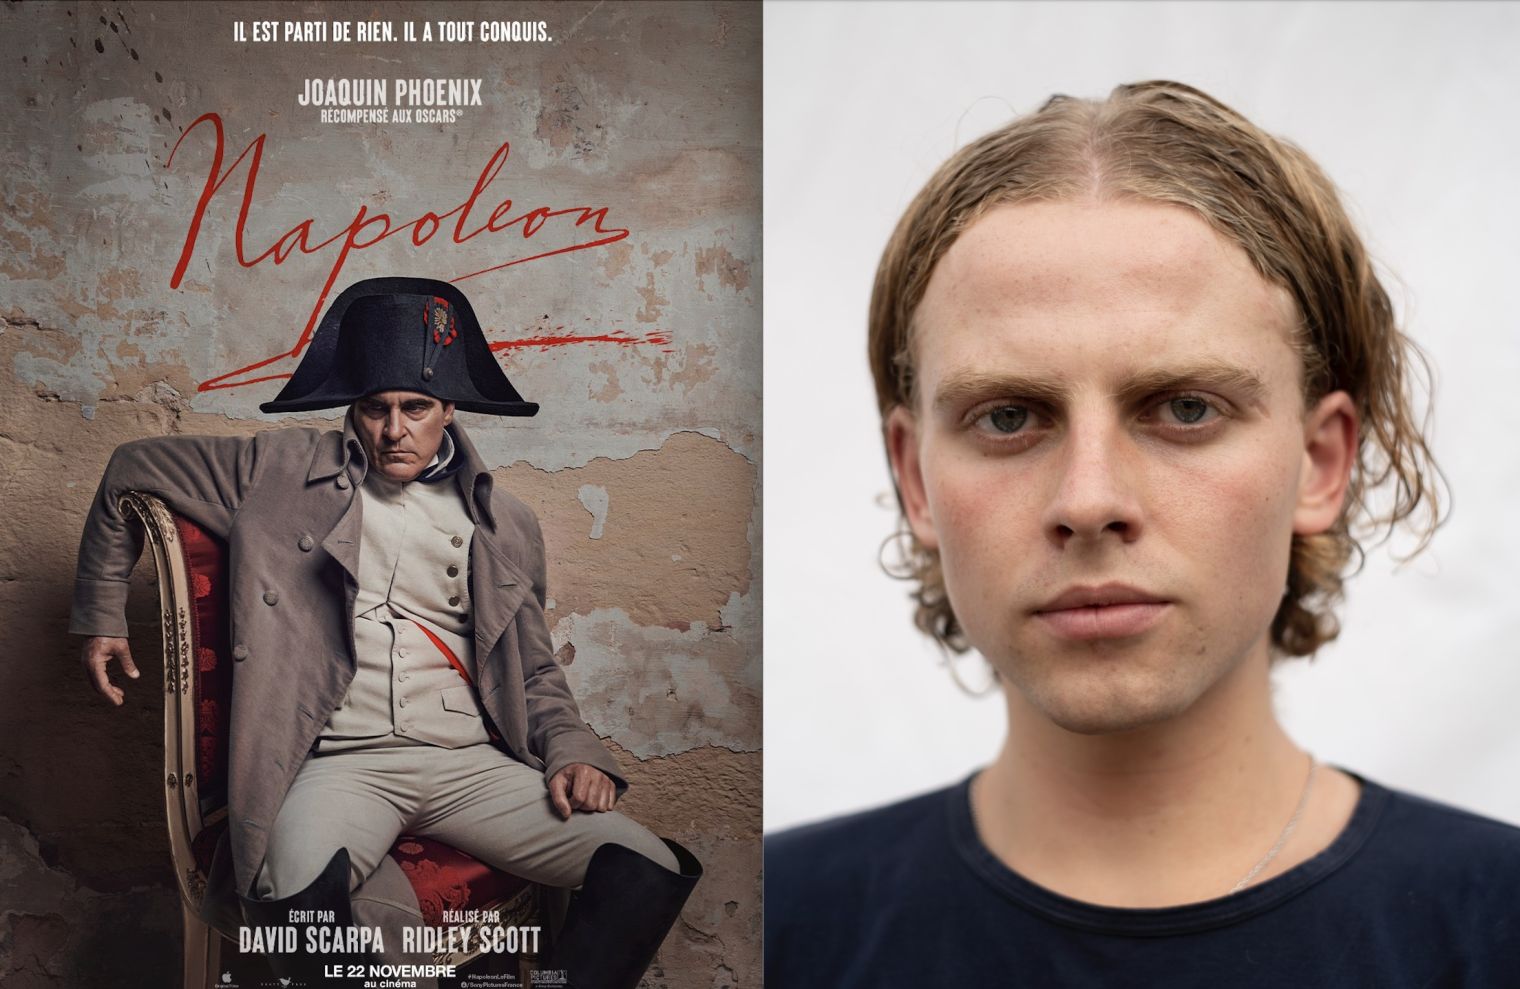 Thom Ashley plays La Bédoyère in Ridley Scott’s Apple TV+ epic ‘Napoleon’ which is out in November